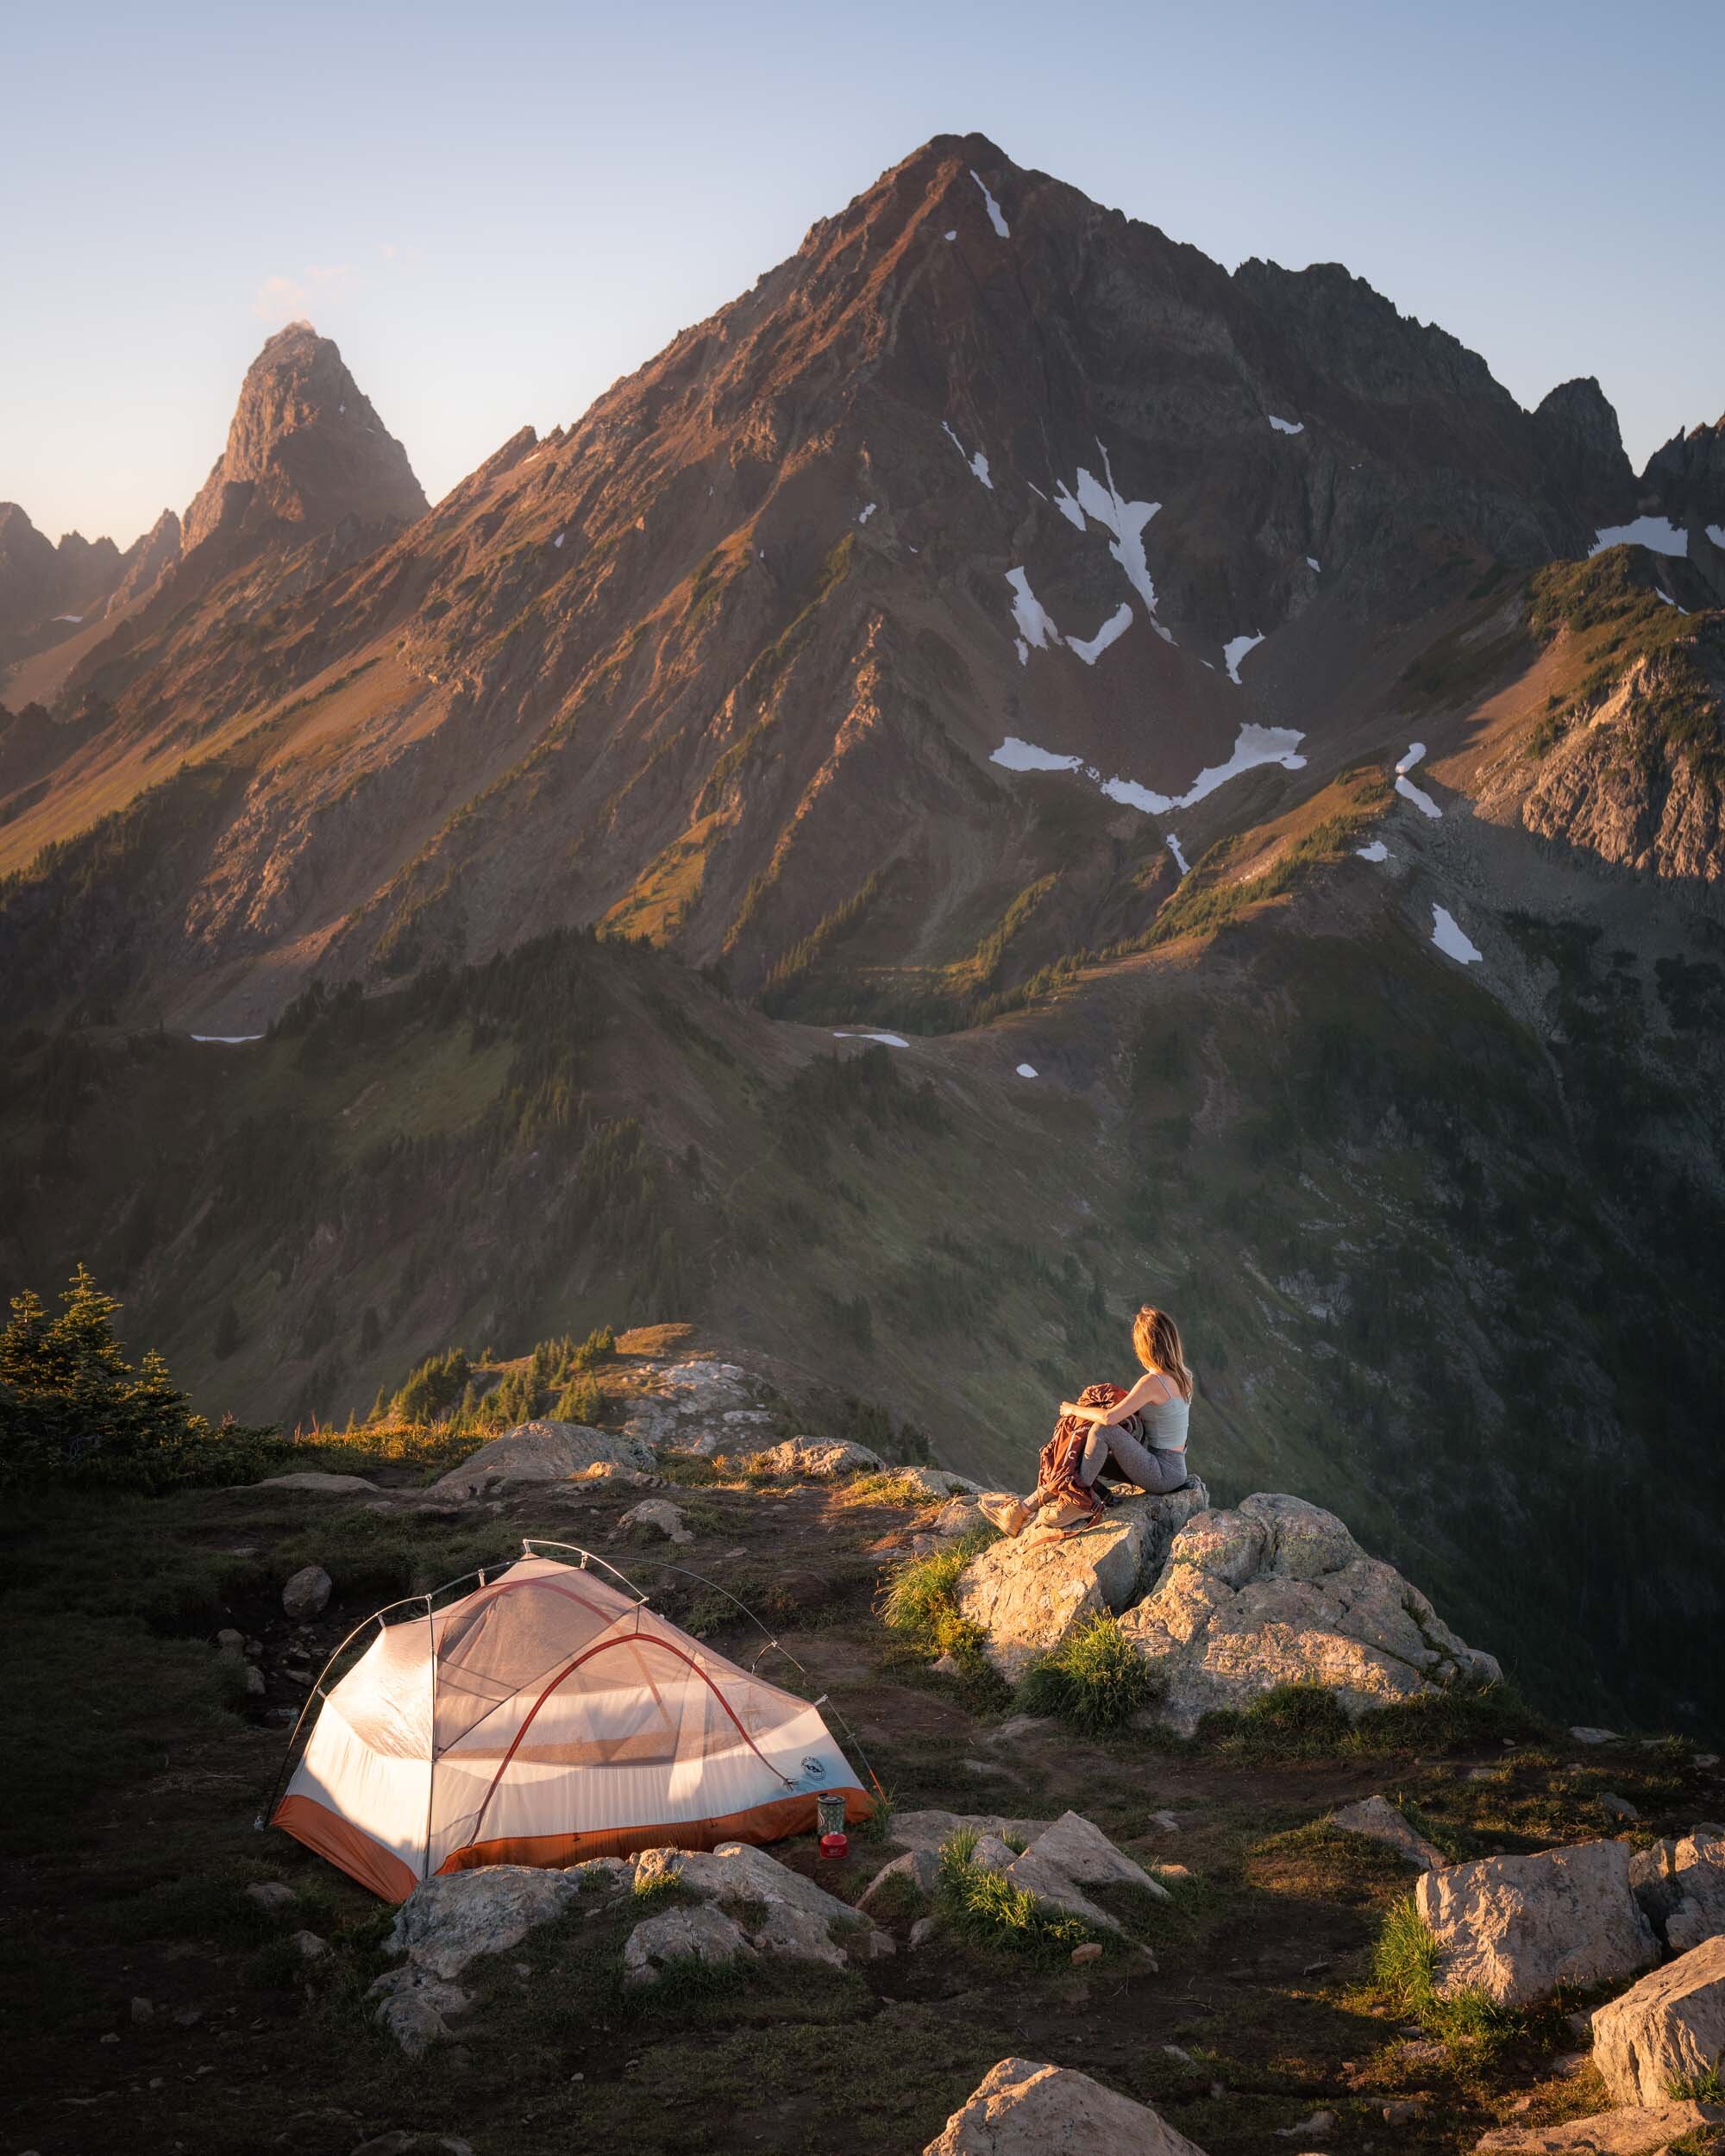 Spending the night in the North Cascades, WA. Tent:  Big Agnes Copper Spur HV UL2 Tent .